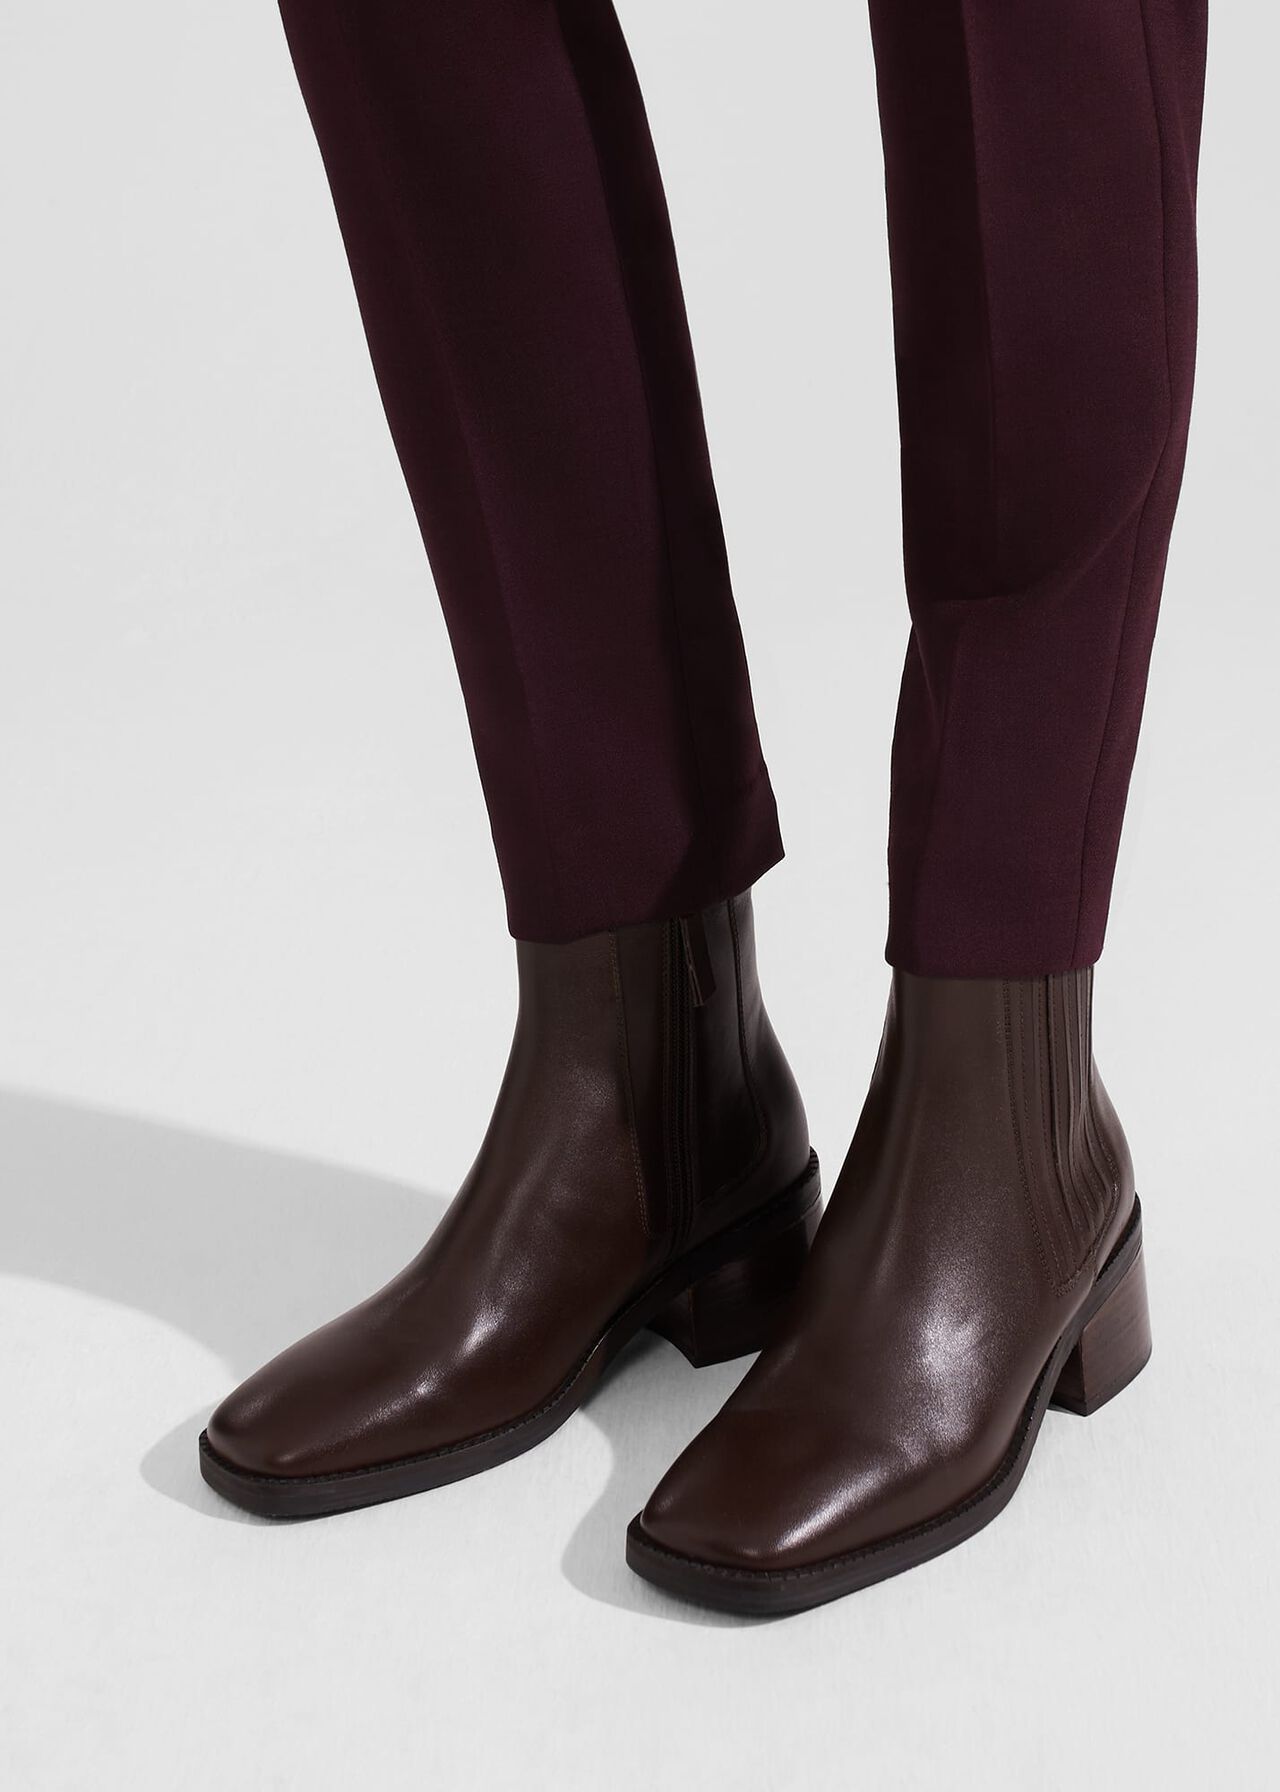 Fran Ankle Boots, Chocolate, hi-res